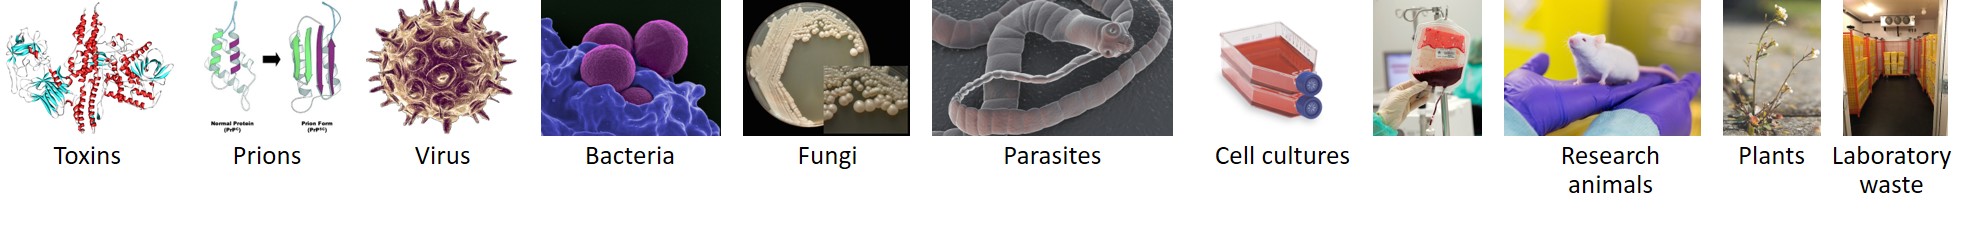 Examples of what can constitute a biorisk